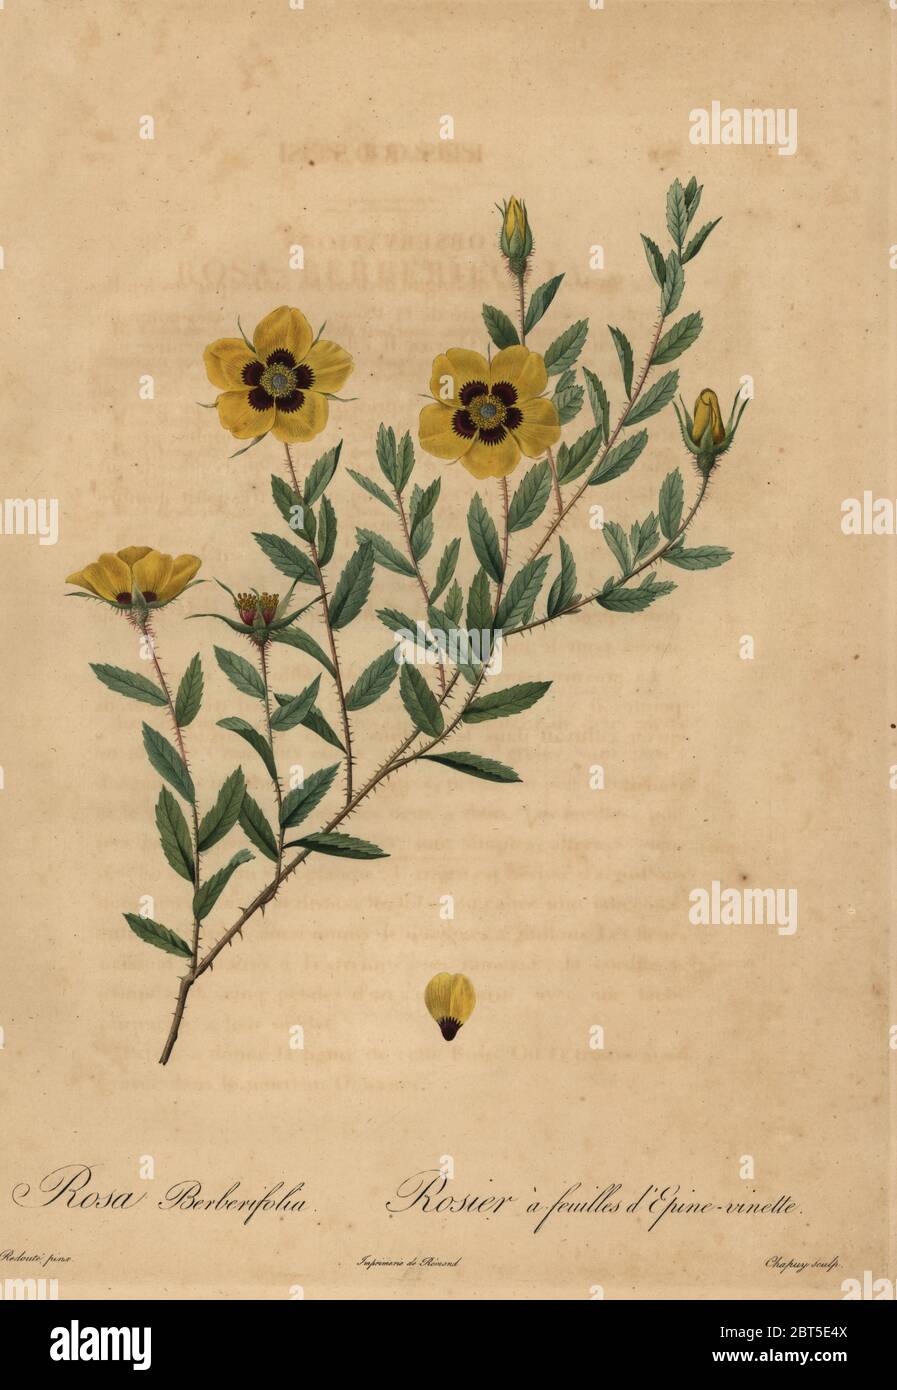 Yellow rose, Rosa berberifolia, Rosier a feuilles depine-vinette. Rosa persica var. berberifolia. Stipple copperplate engraving by Jean Baptiste Chapuy handcoloured a la poupee after a botanical illustration by Pierre-Joseph Redoute from the first folio edition of Les Roses, Firmin Didot, Paris, 1817. Stock Photo